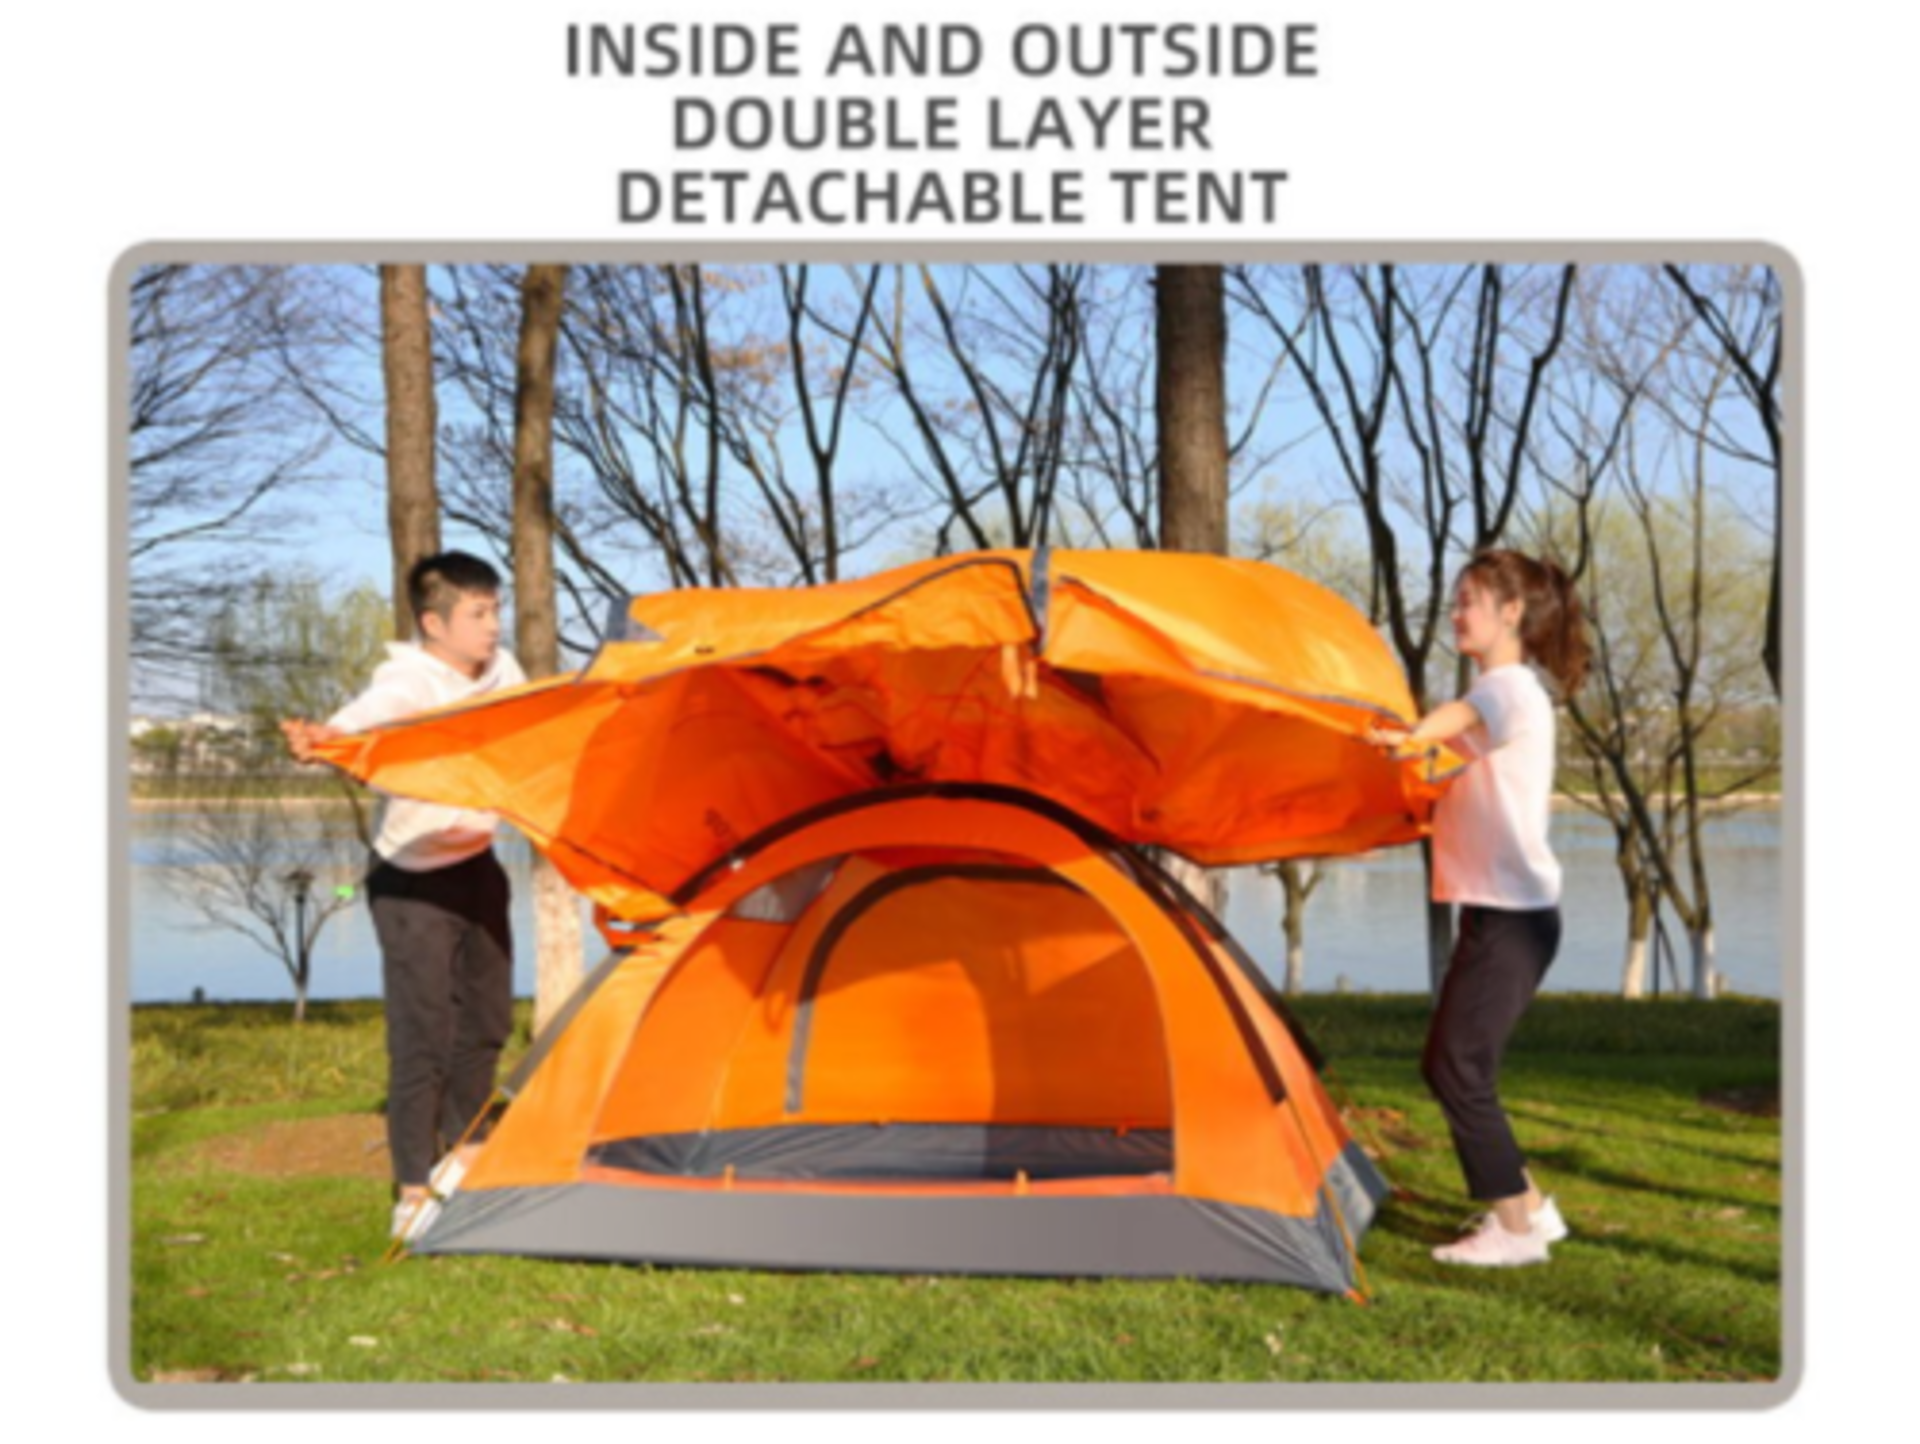 Hot Selling Waterproof 3-4 Person Outdoor Camping Backpacking Oxford Tent - Image 3 of 3